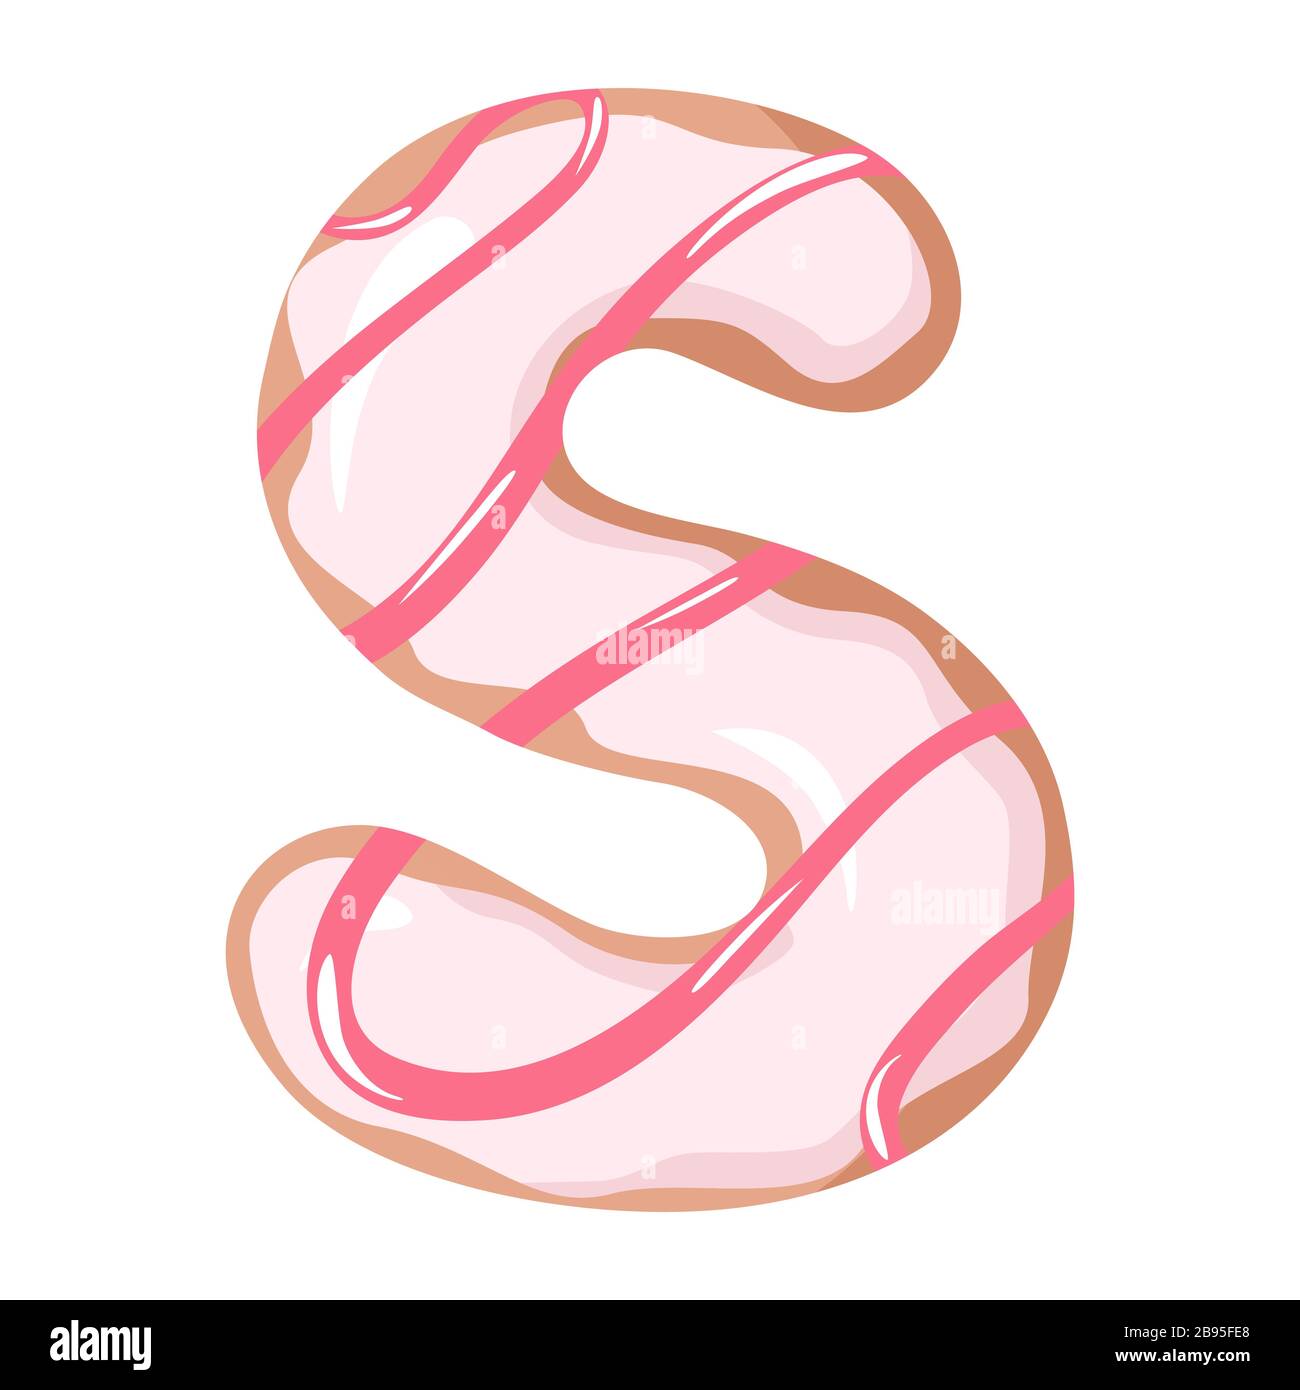 Sweet Donut Font Vector With Letter S Shape. Royalty Free SVG